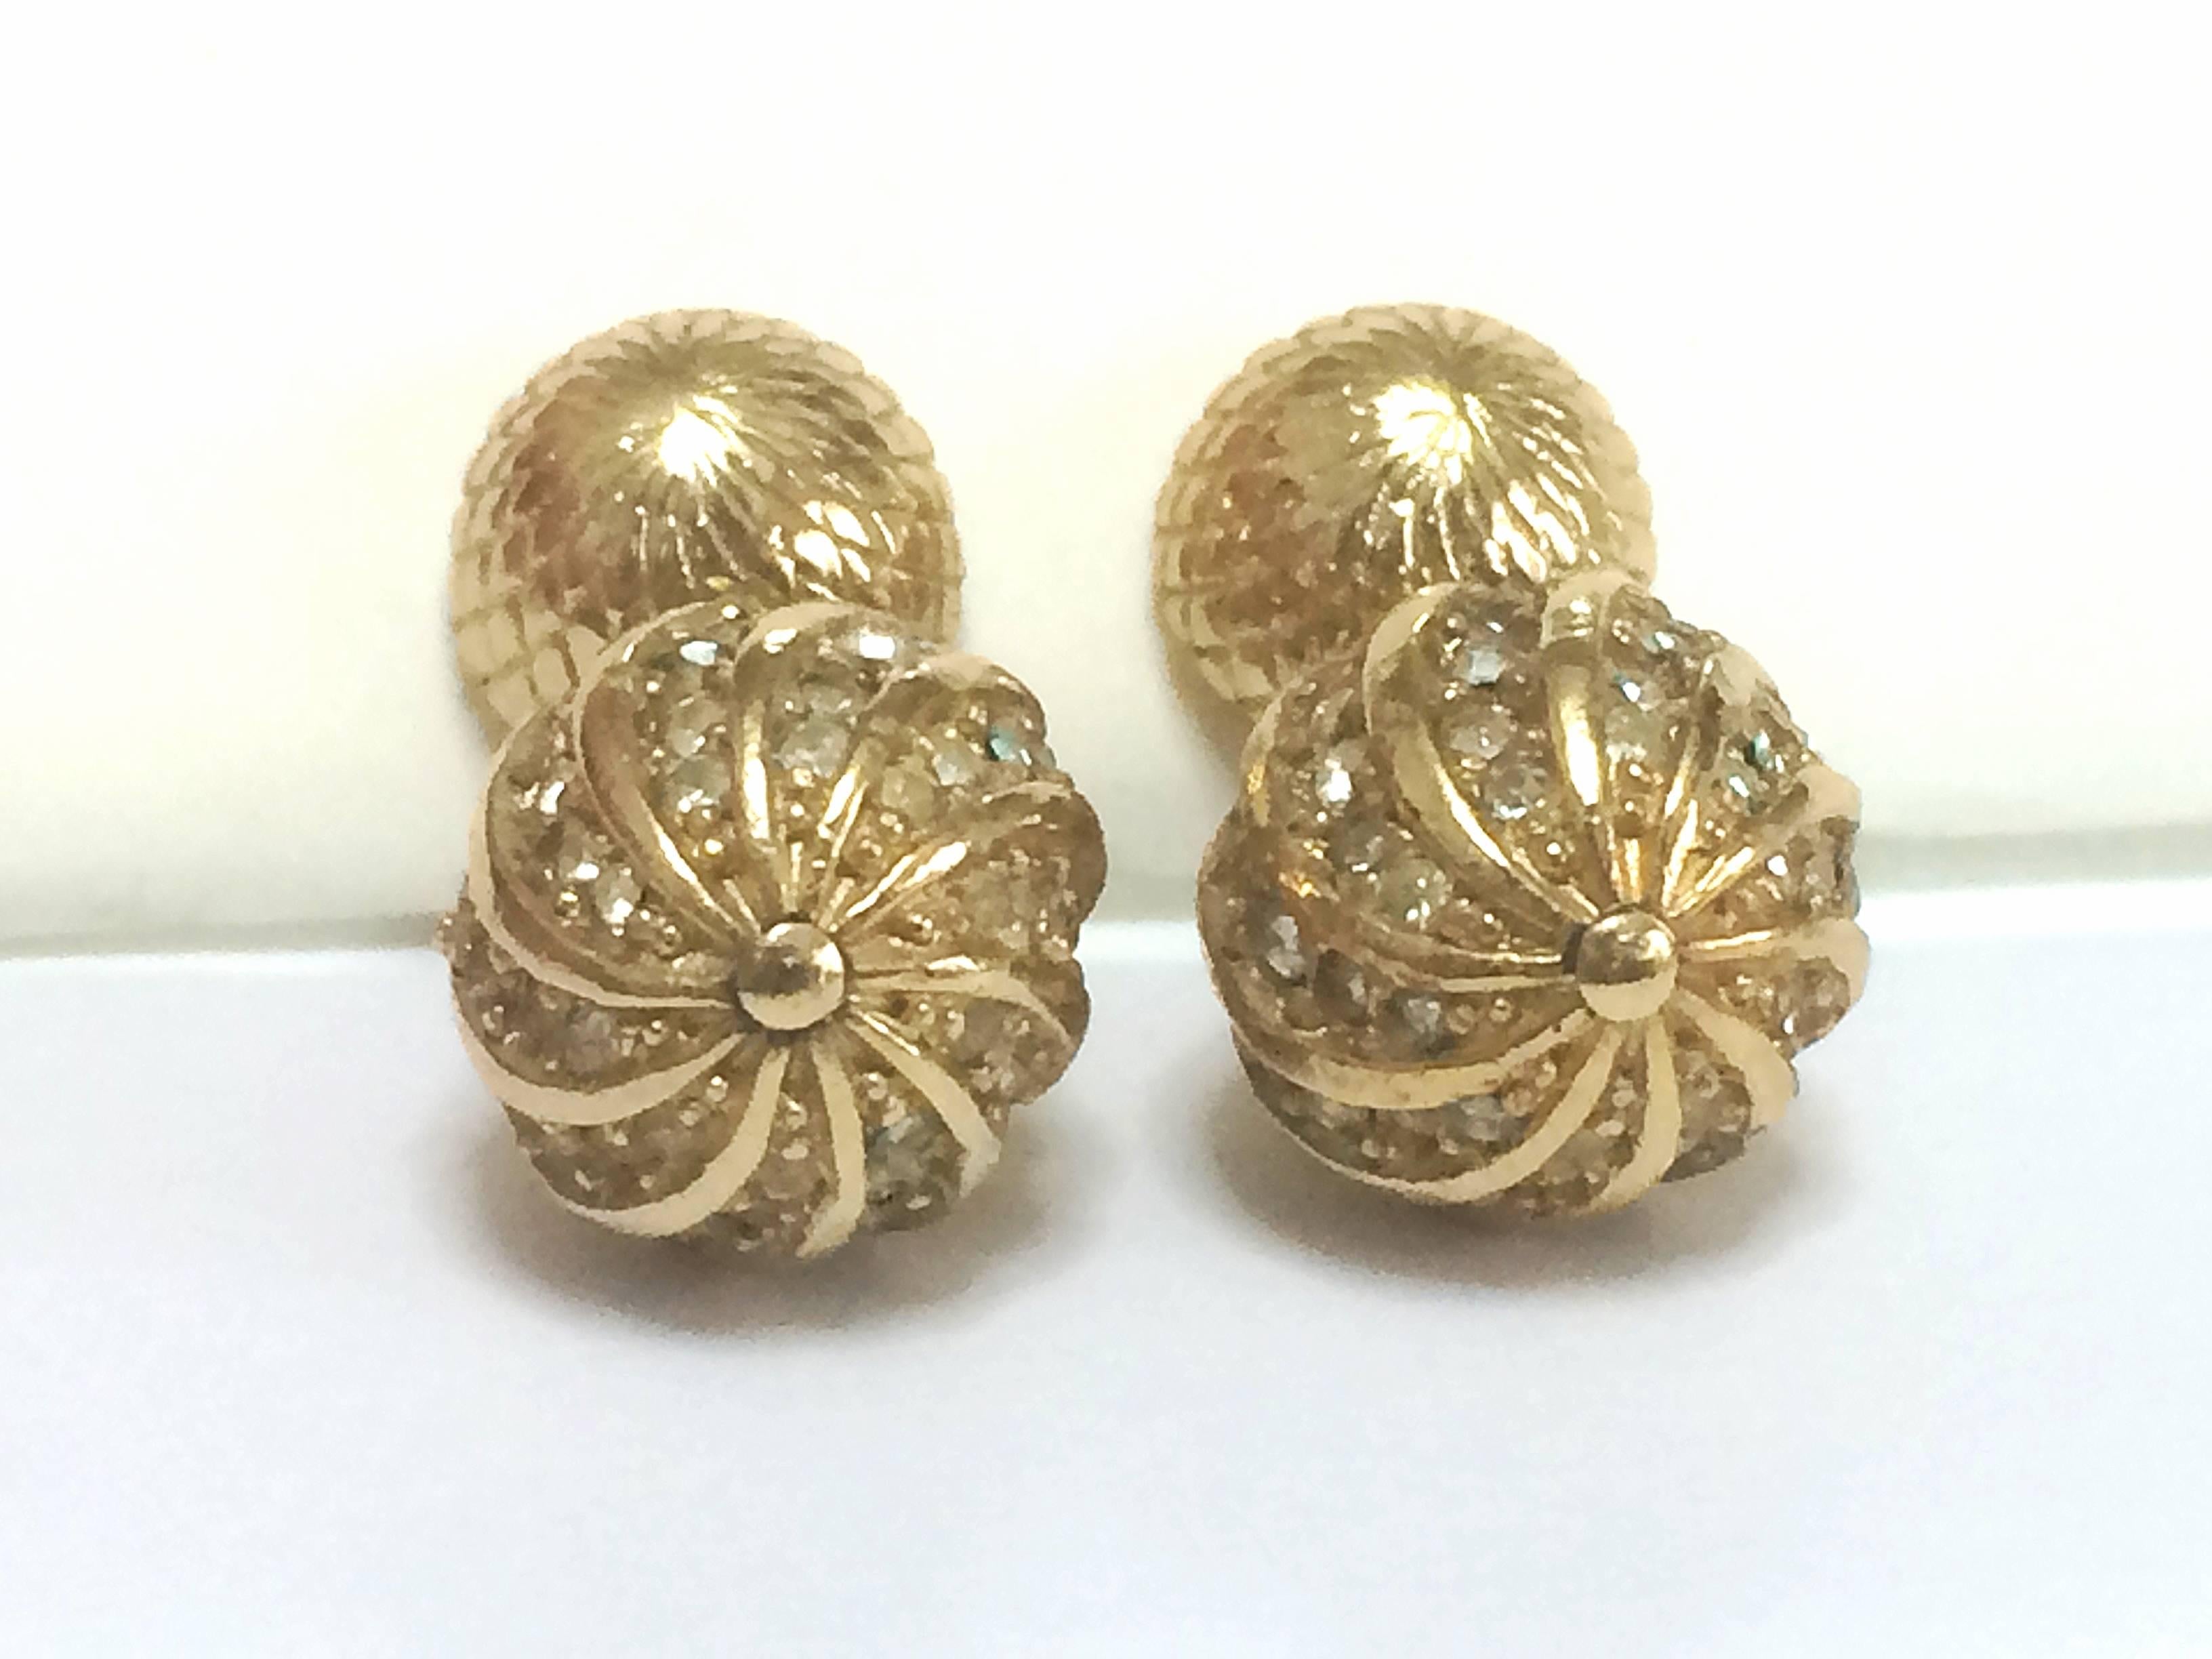 1990s. Vintage Christian Dior golden ball charm dangling earrings with rhinestone crystals.

Introducing another vintage jewelry piece from Christian Dior back in the 90's.
Gold tone 2 elaborated ball charm dangling earrings with rhinestone